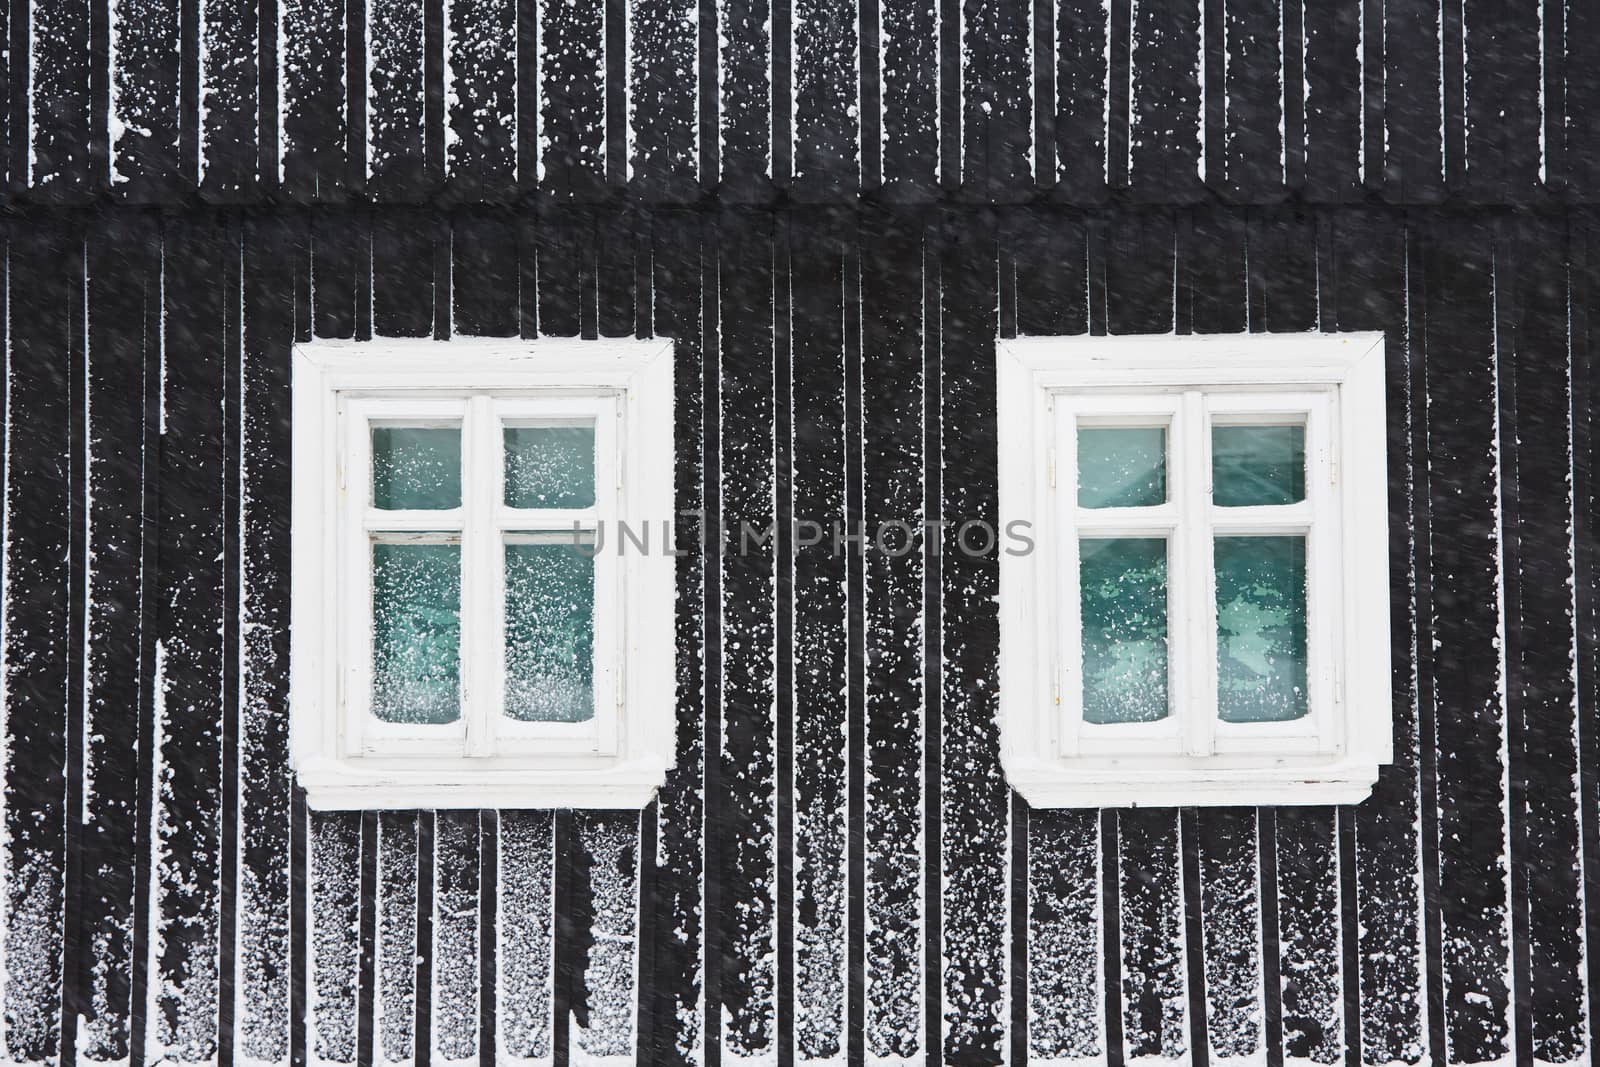 Two windows of the wooden house in winter